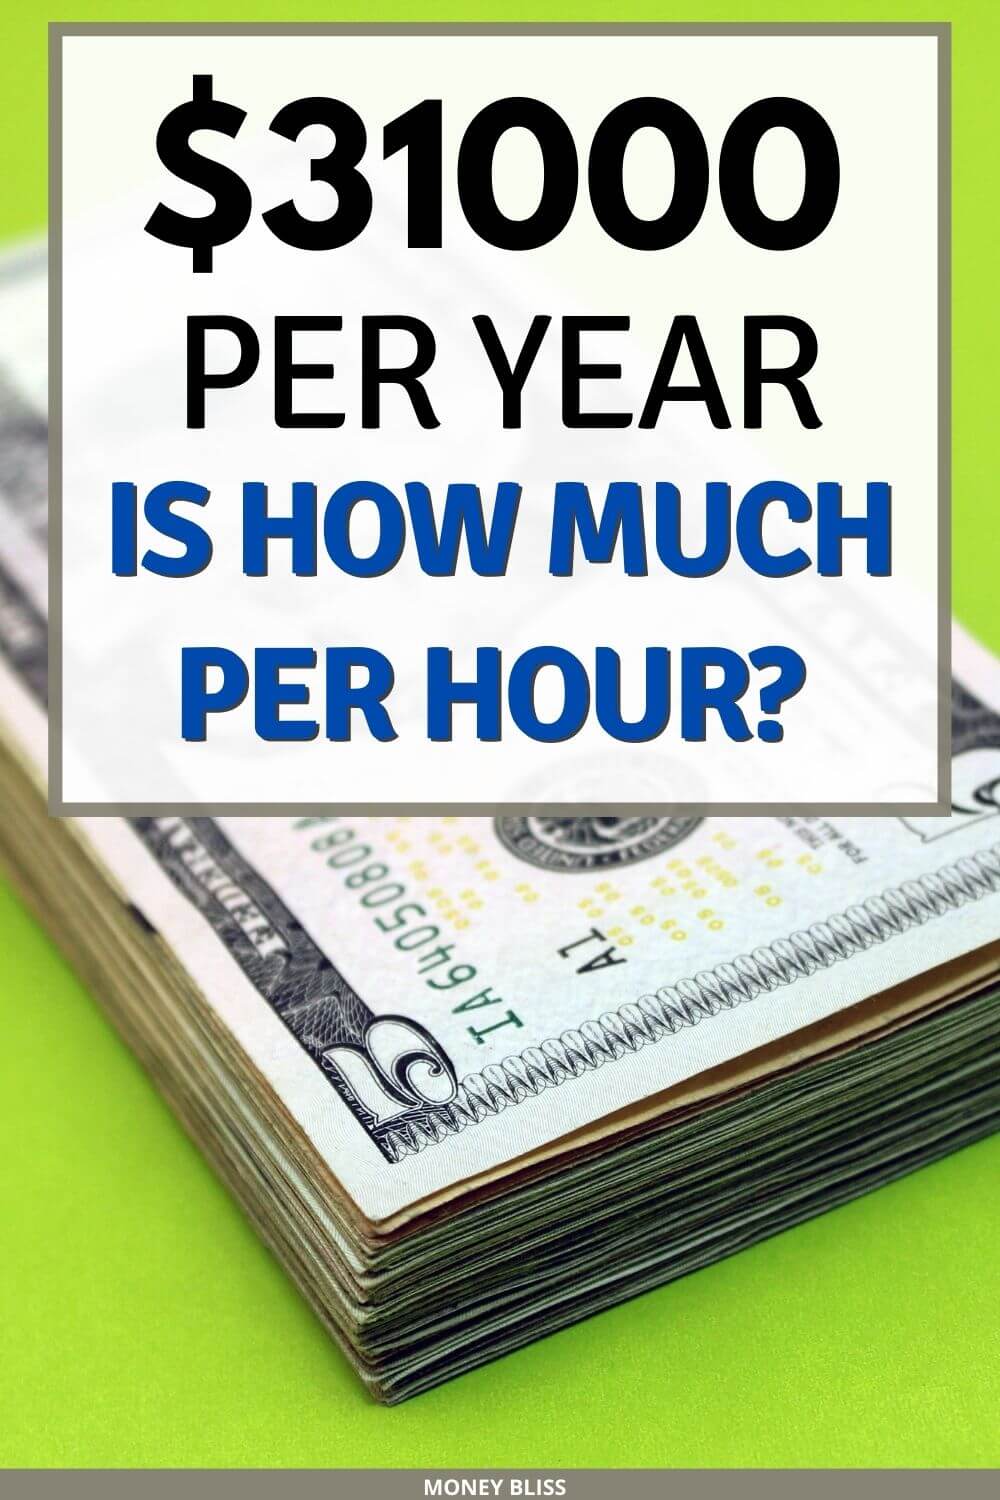 $31000 a year is how much an hour? Learn how much your 31k salary is hourly. Plus find a 31000 salary budget to live the lifestyle you want.